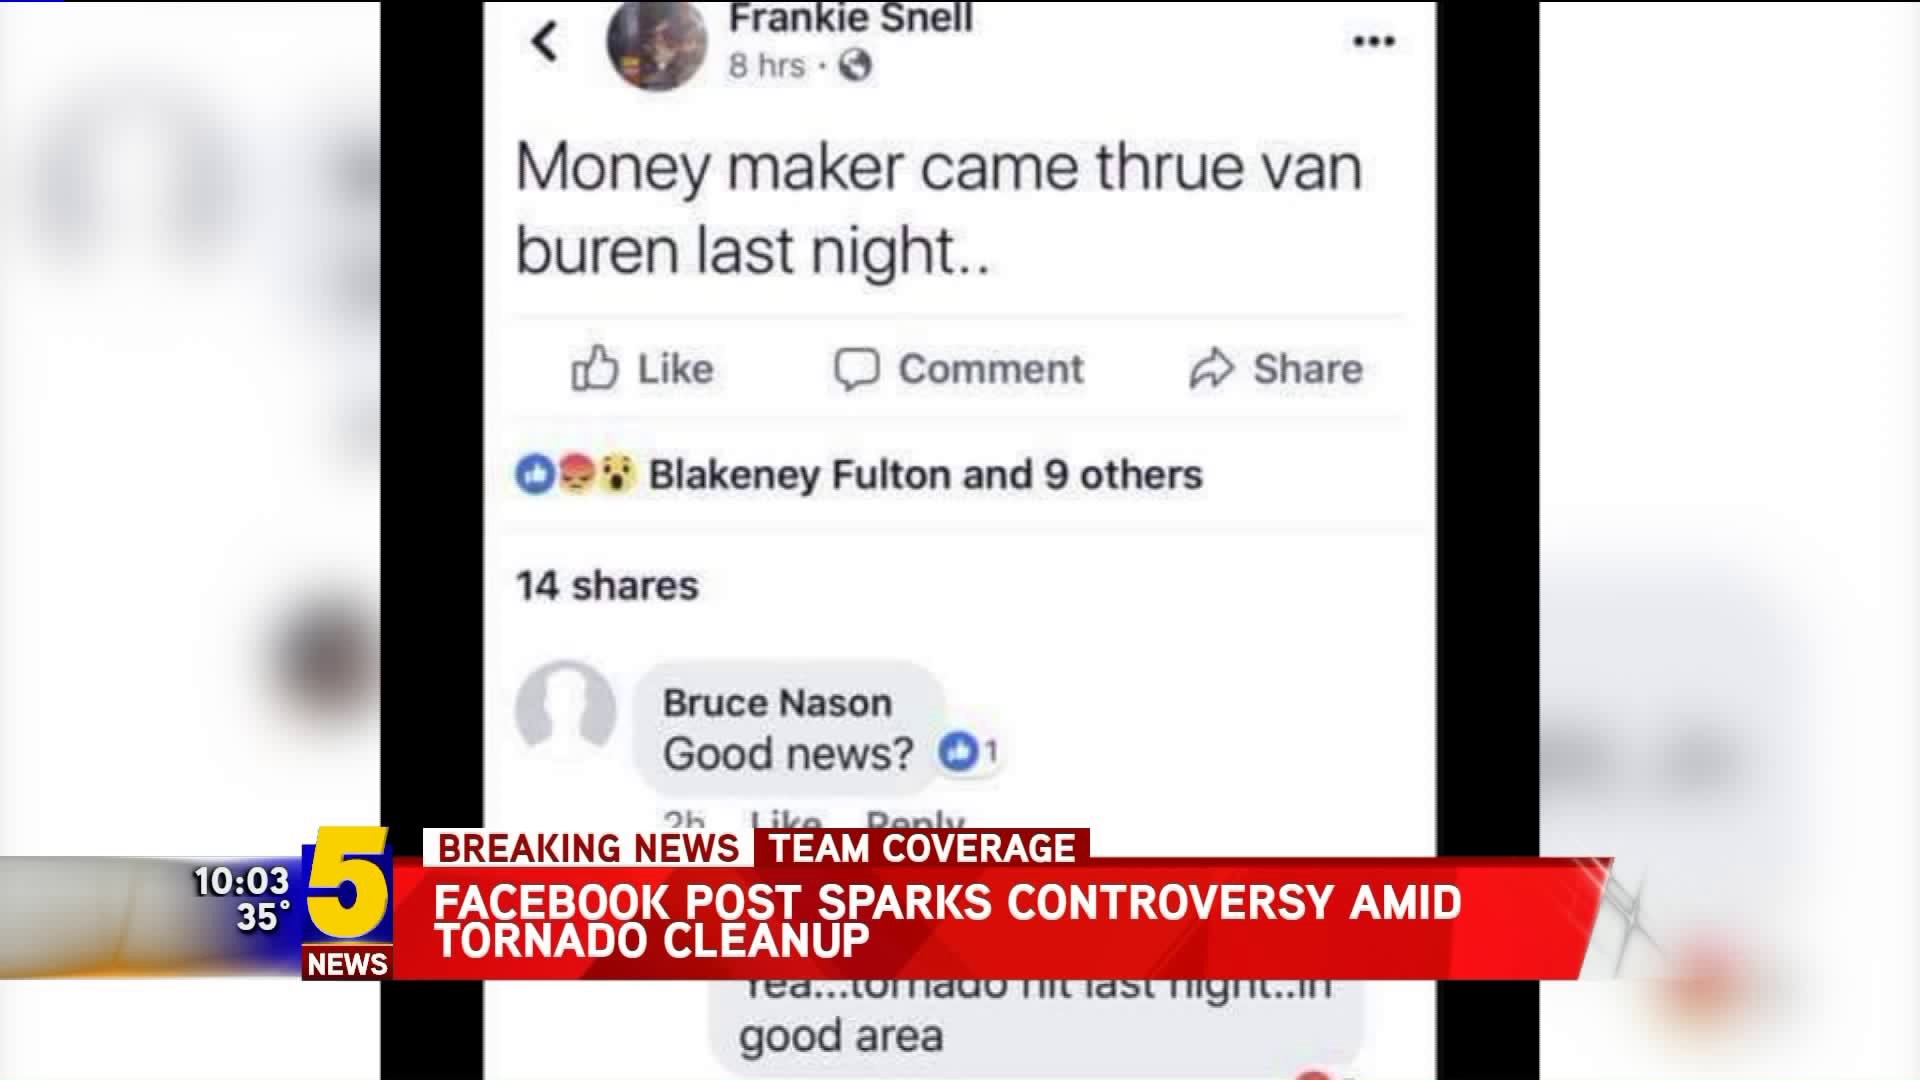 Facebook Post Sparks Controversy Amid Tornado Cleanup